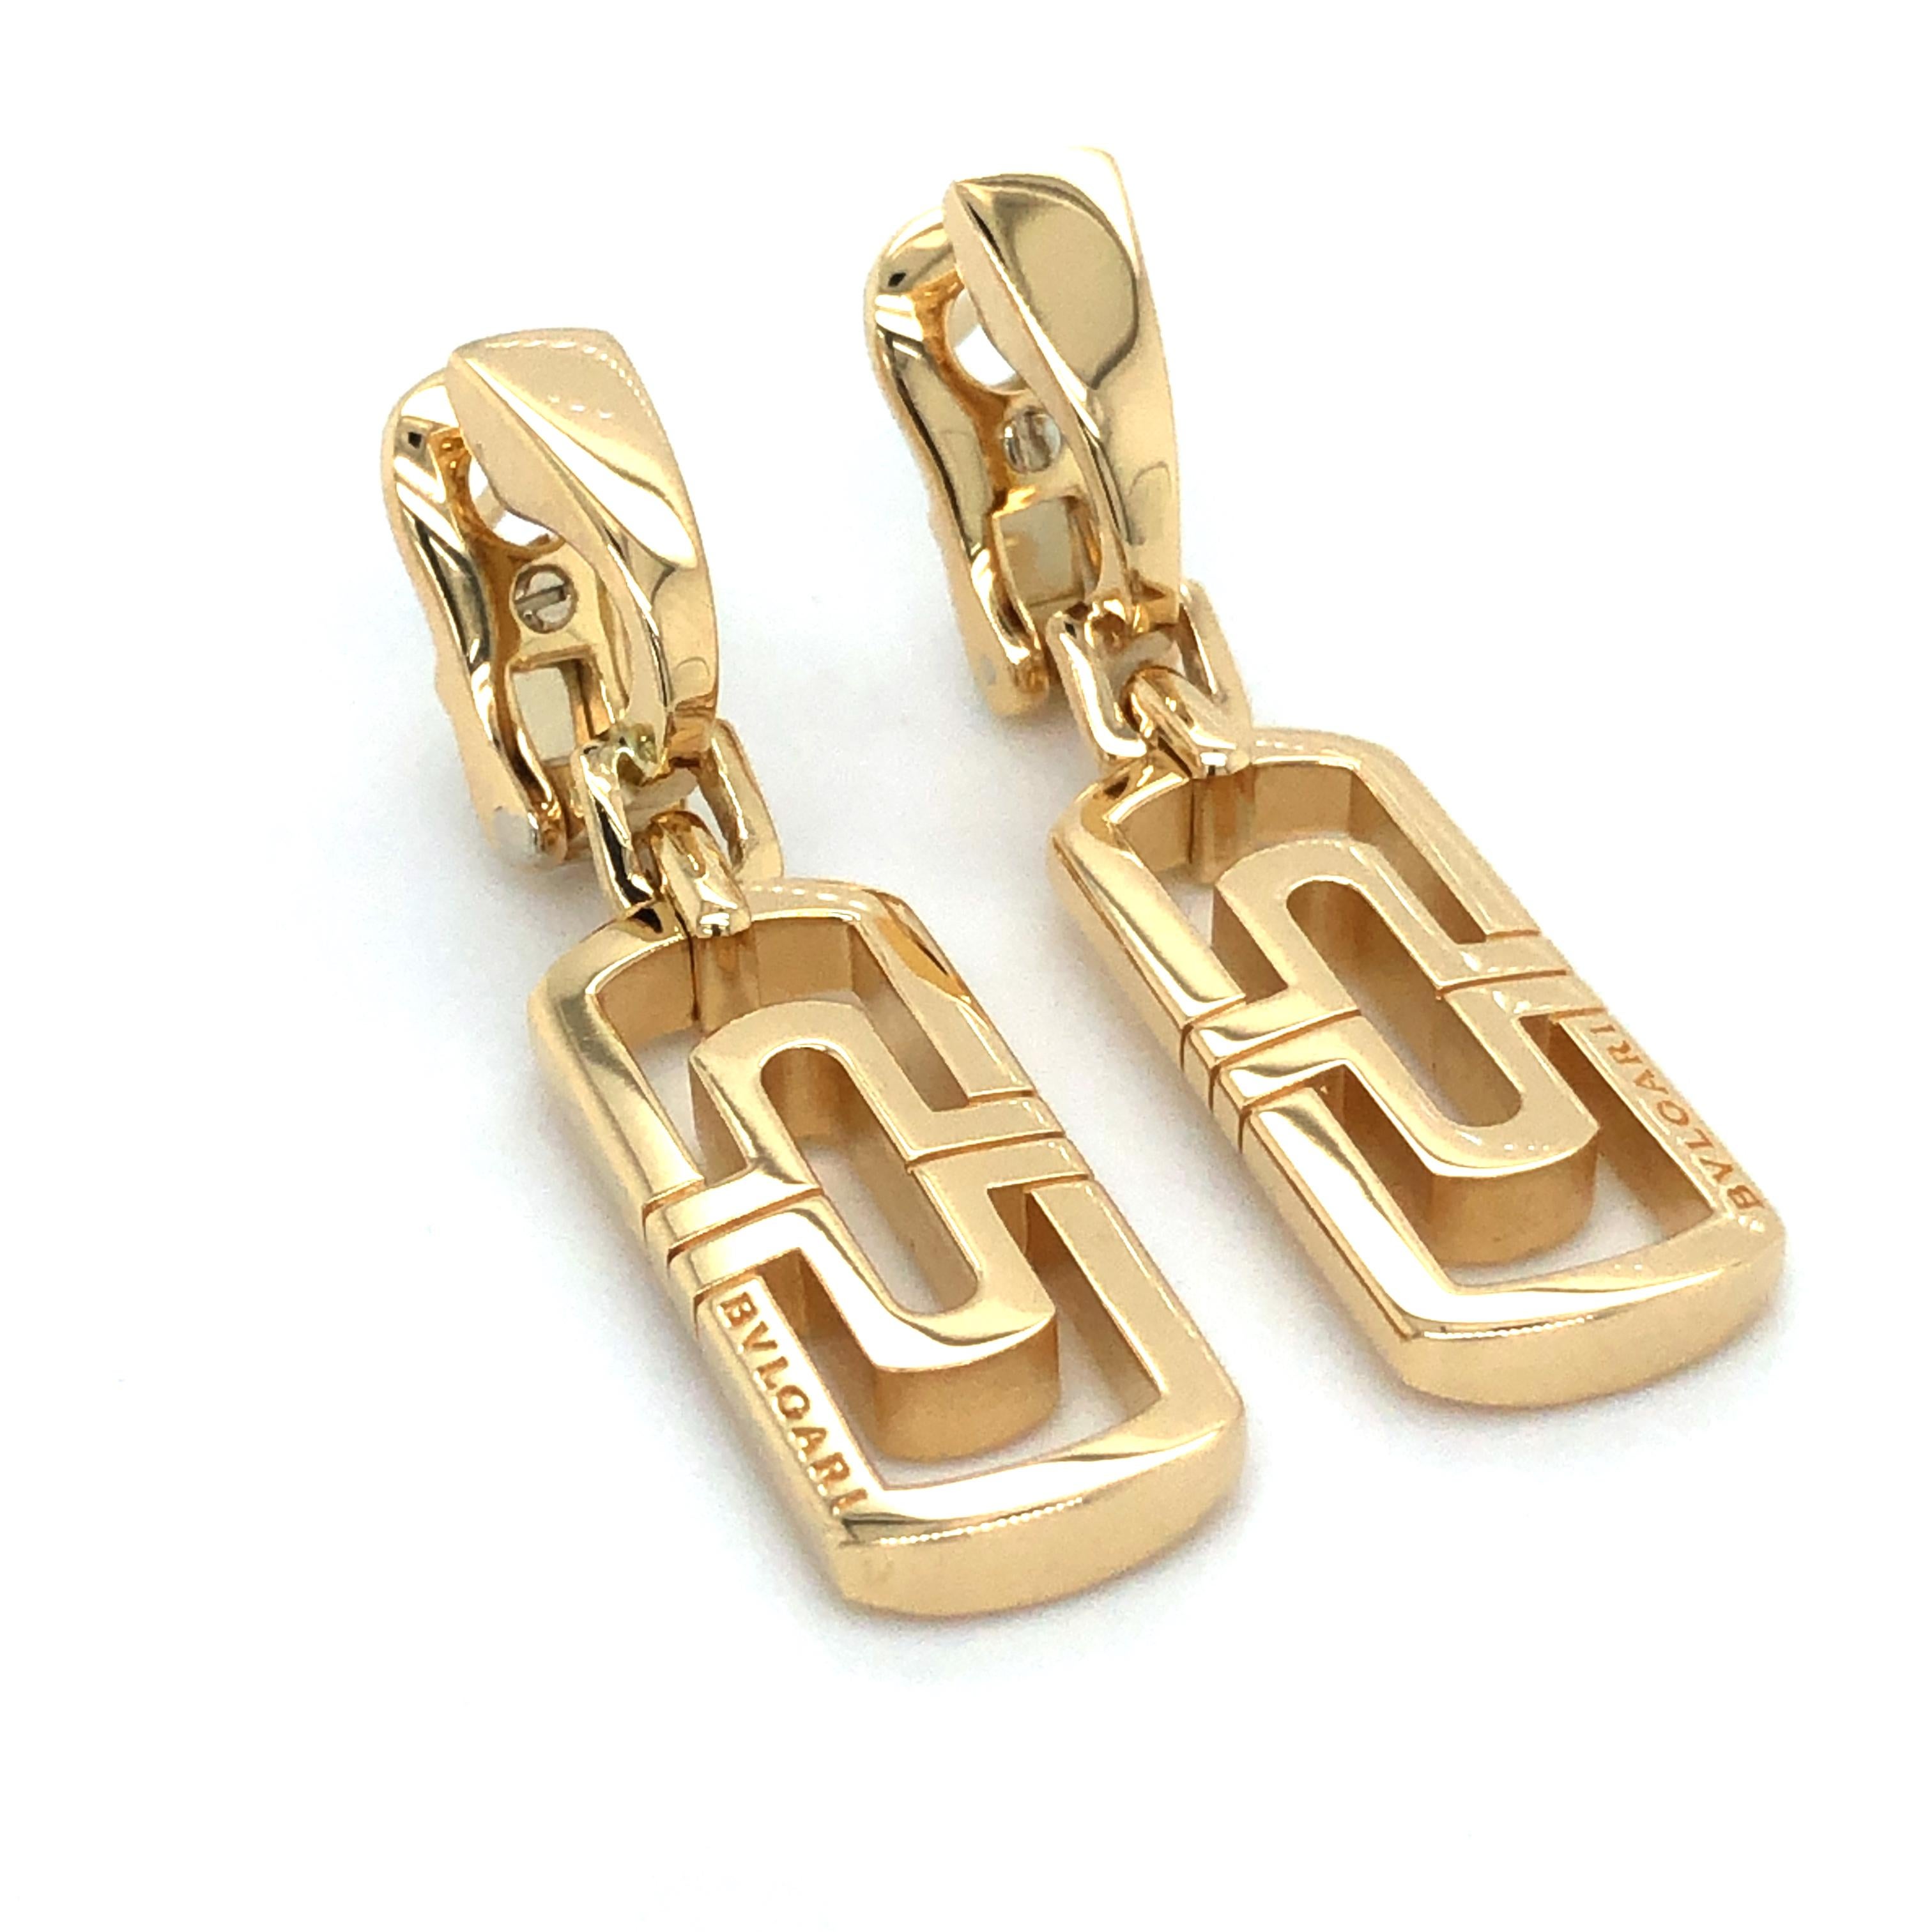  Iconic and rare vintage Bvlgari Panentesi yellow gold dangling earrings. The earrings show unique geometric designs sculpted in solid 18k gold. The earrings are square in shape and show movement when worn. The earrings are secured with a stud post